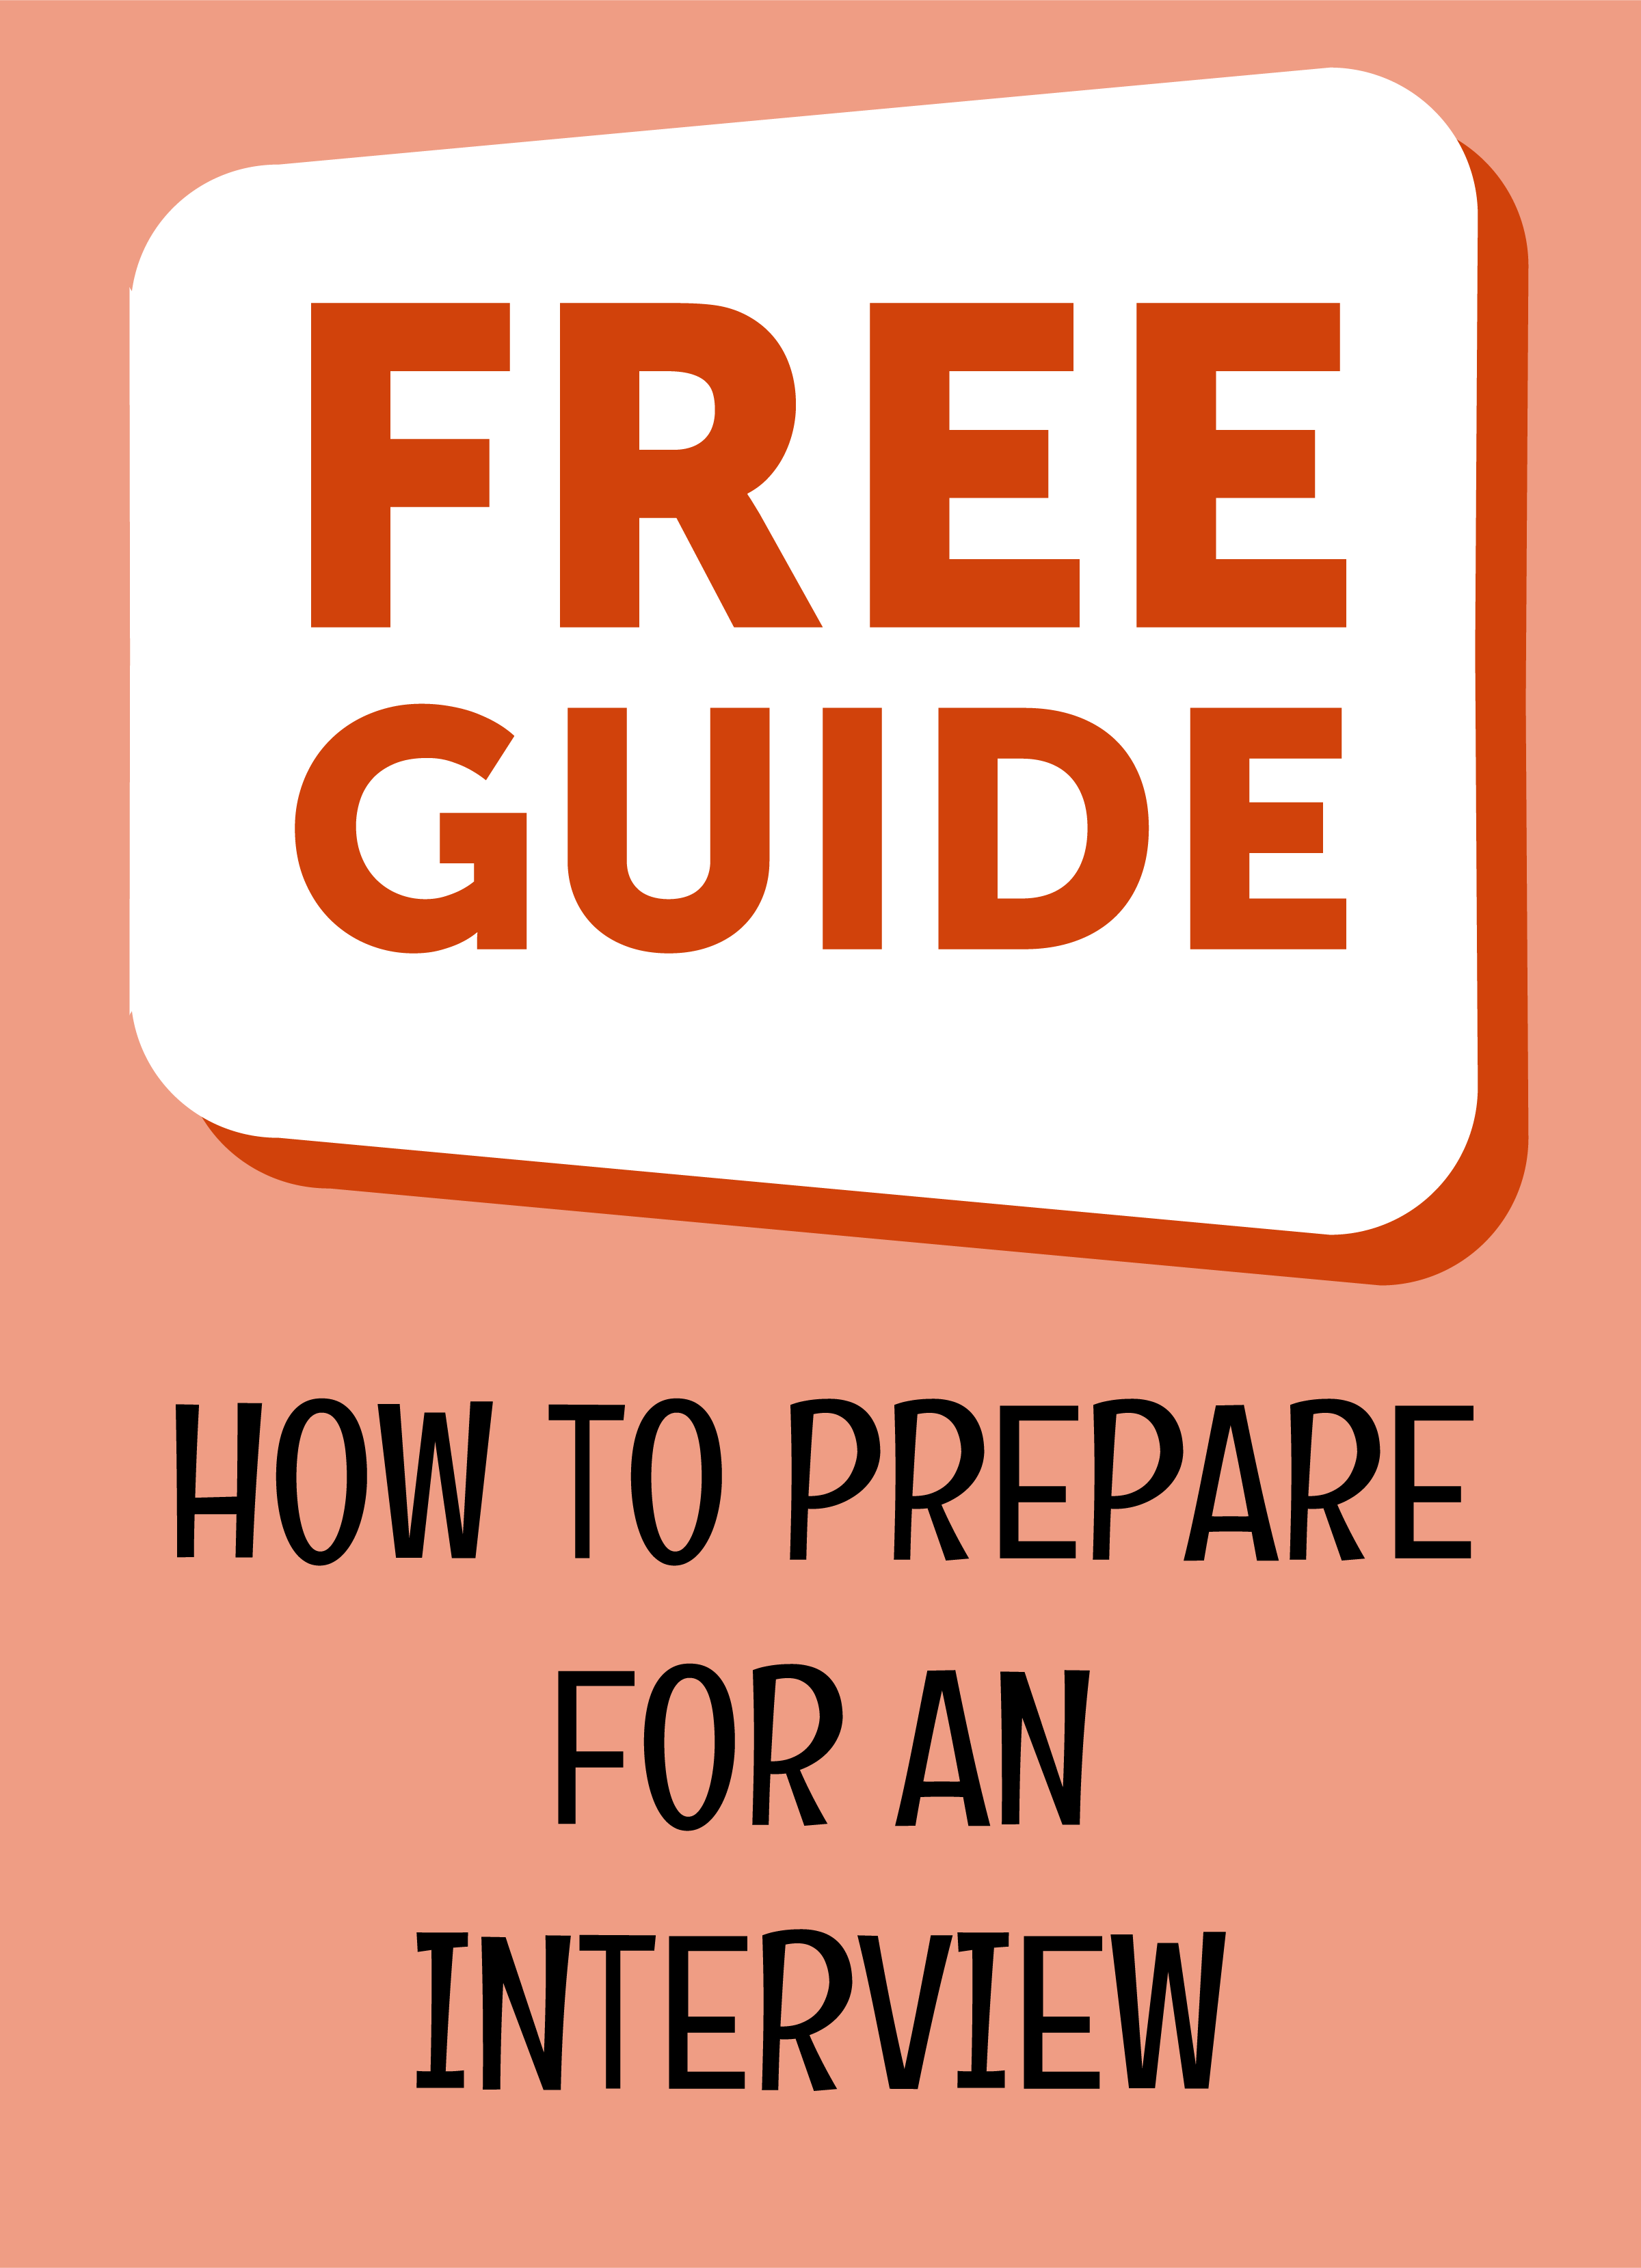 Free Guide: How to Prepare For an Interview by Alison Green